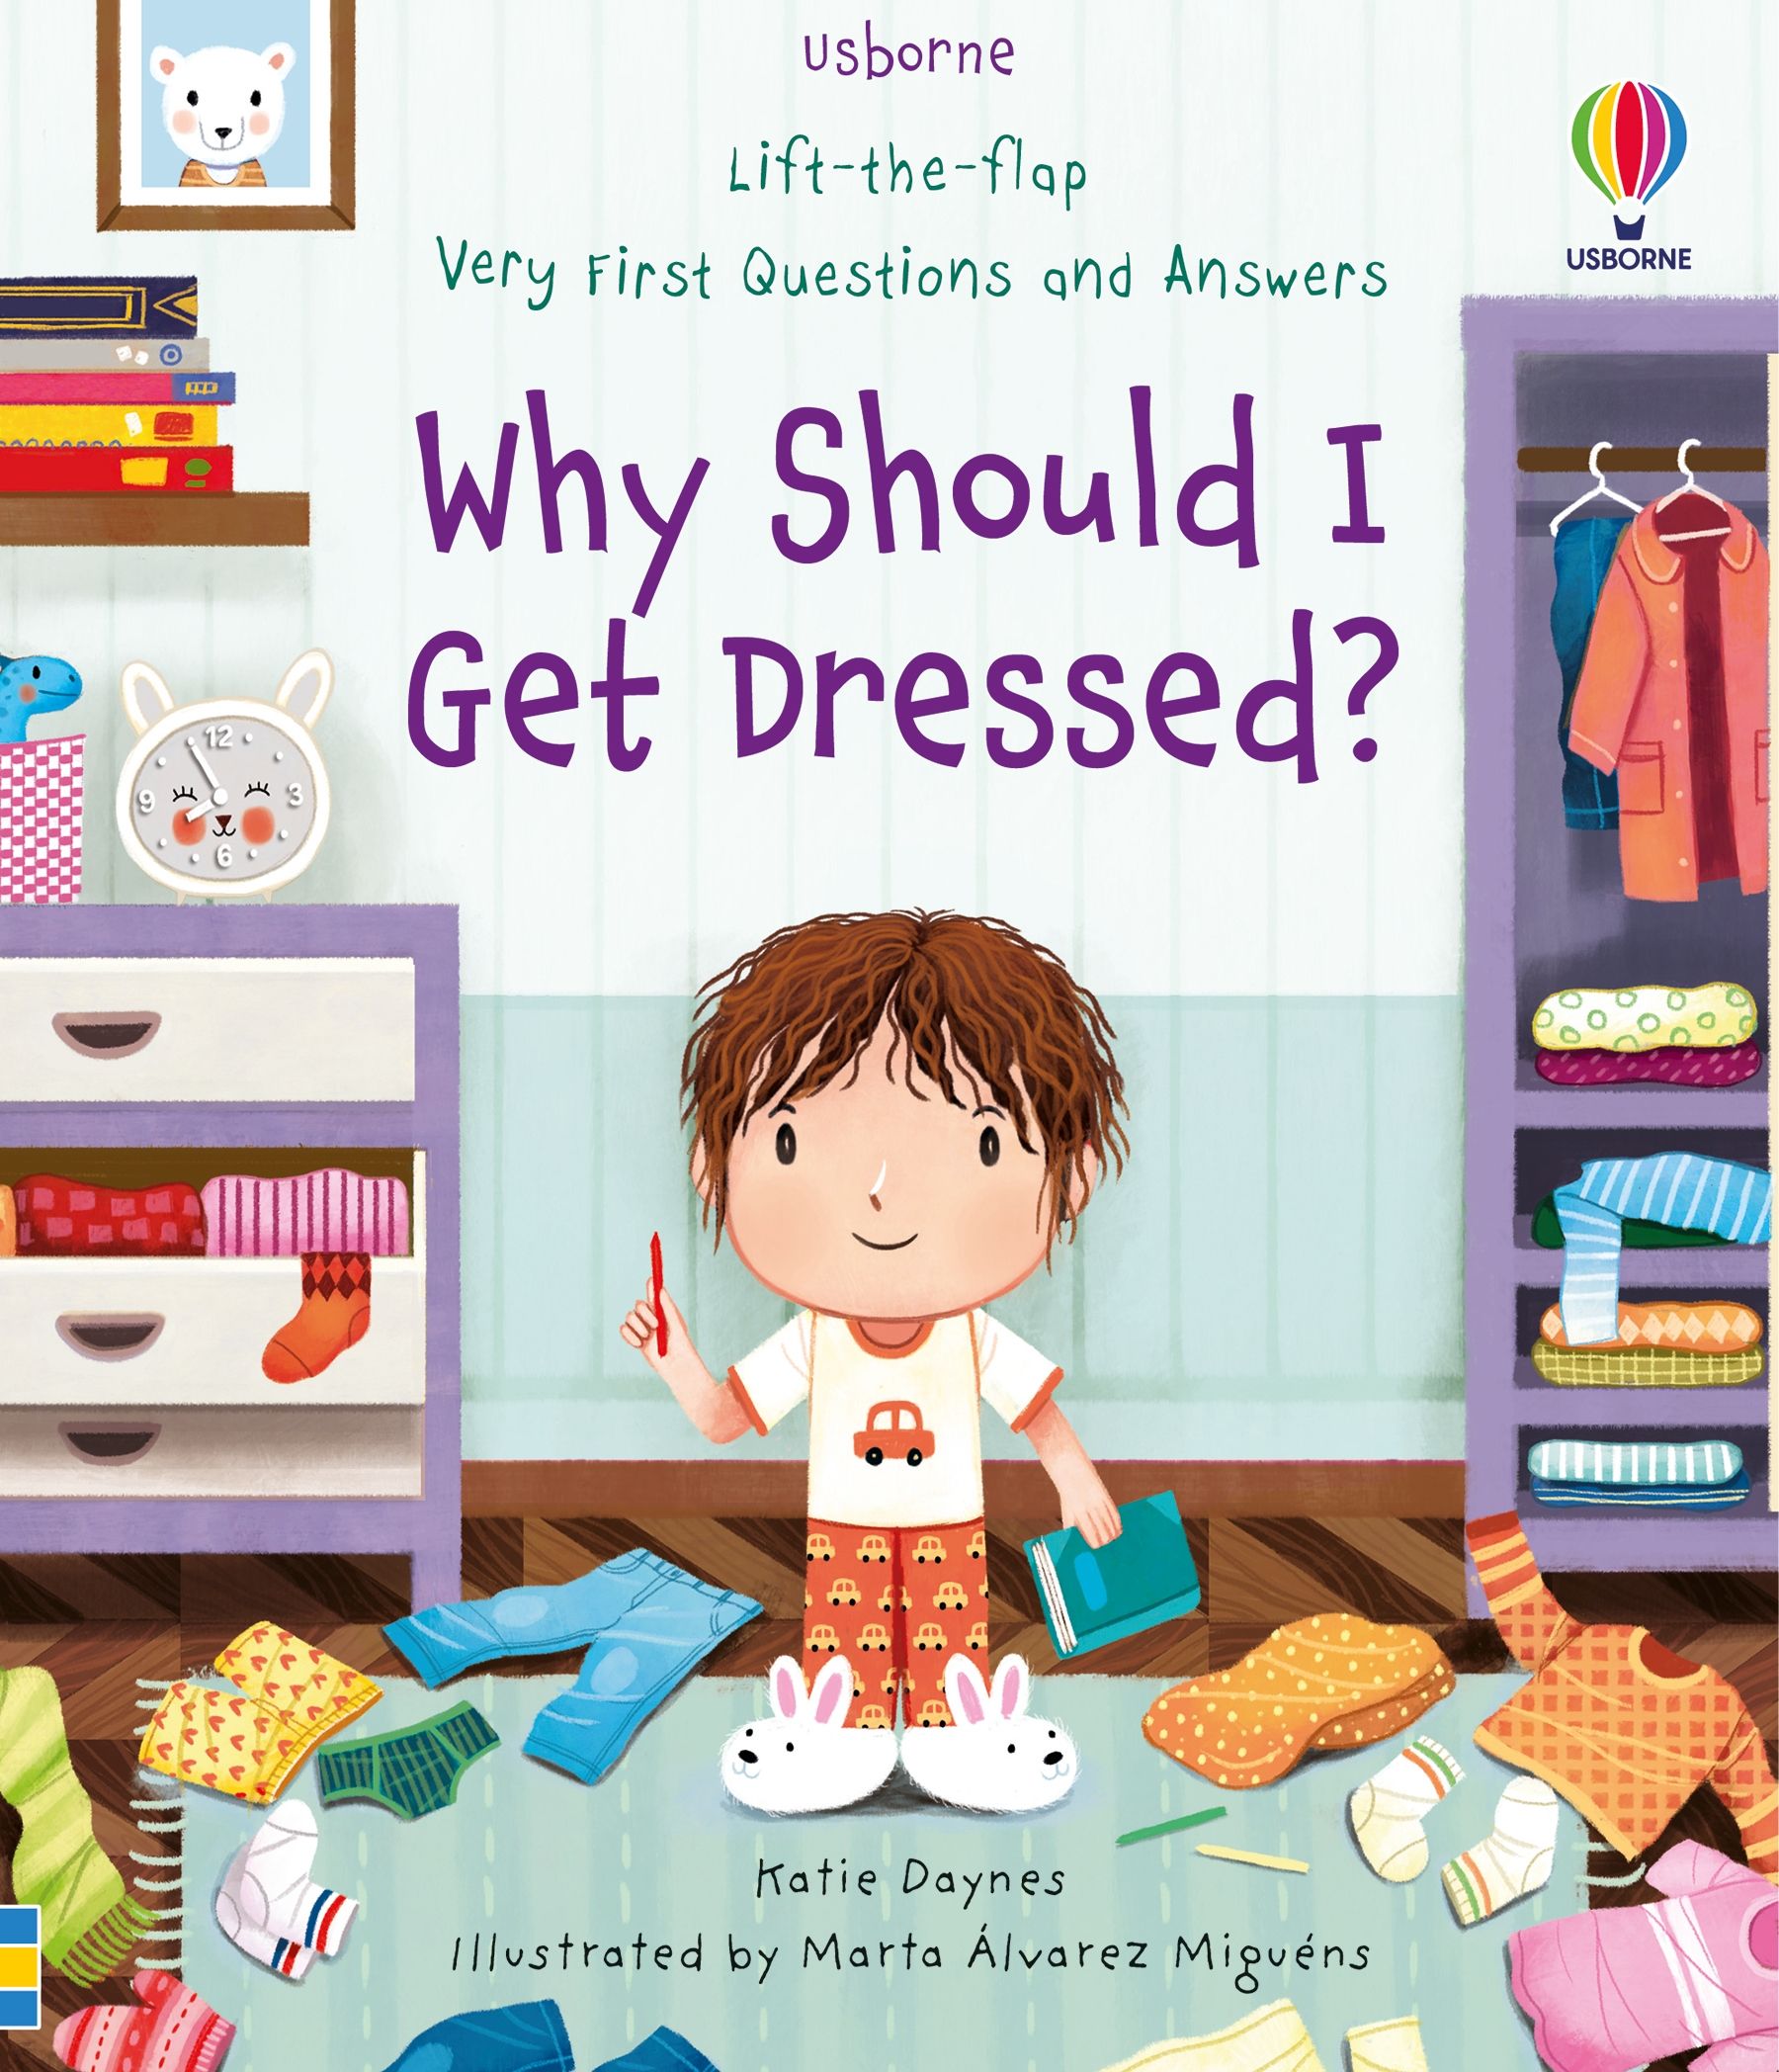 Why Should I Get Dressed? - Lift The Flap First Questions and Answers    